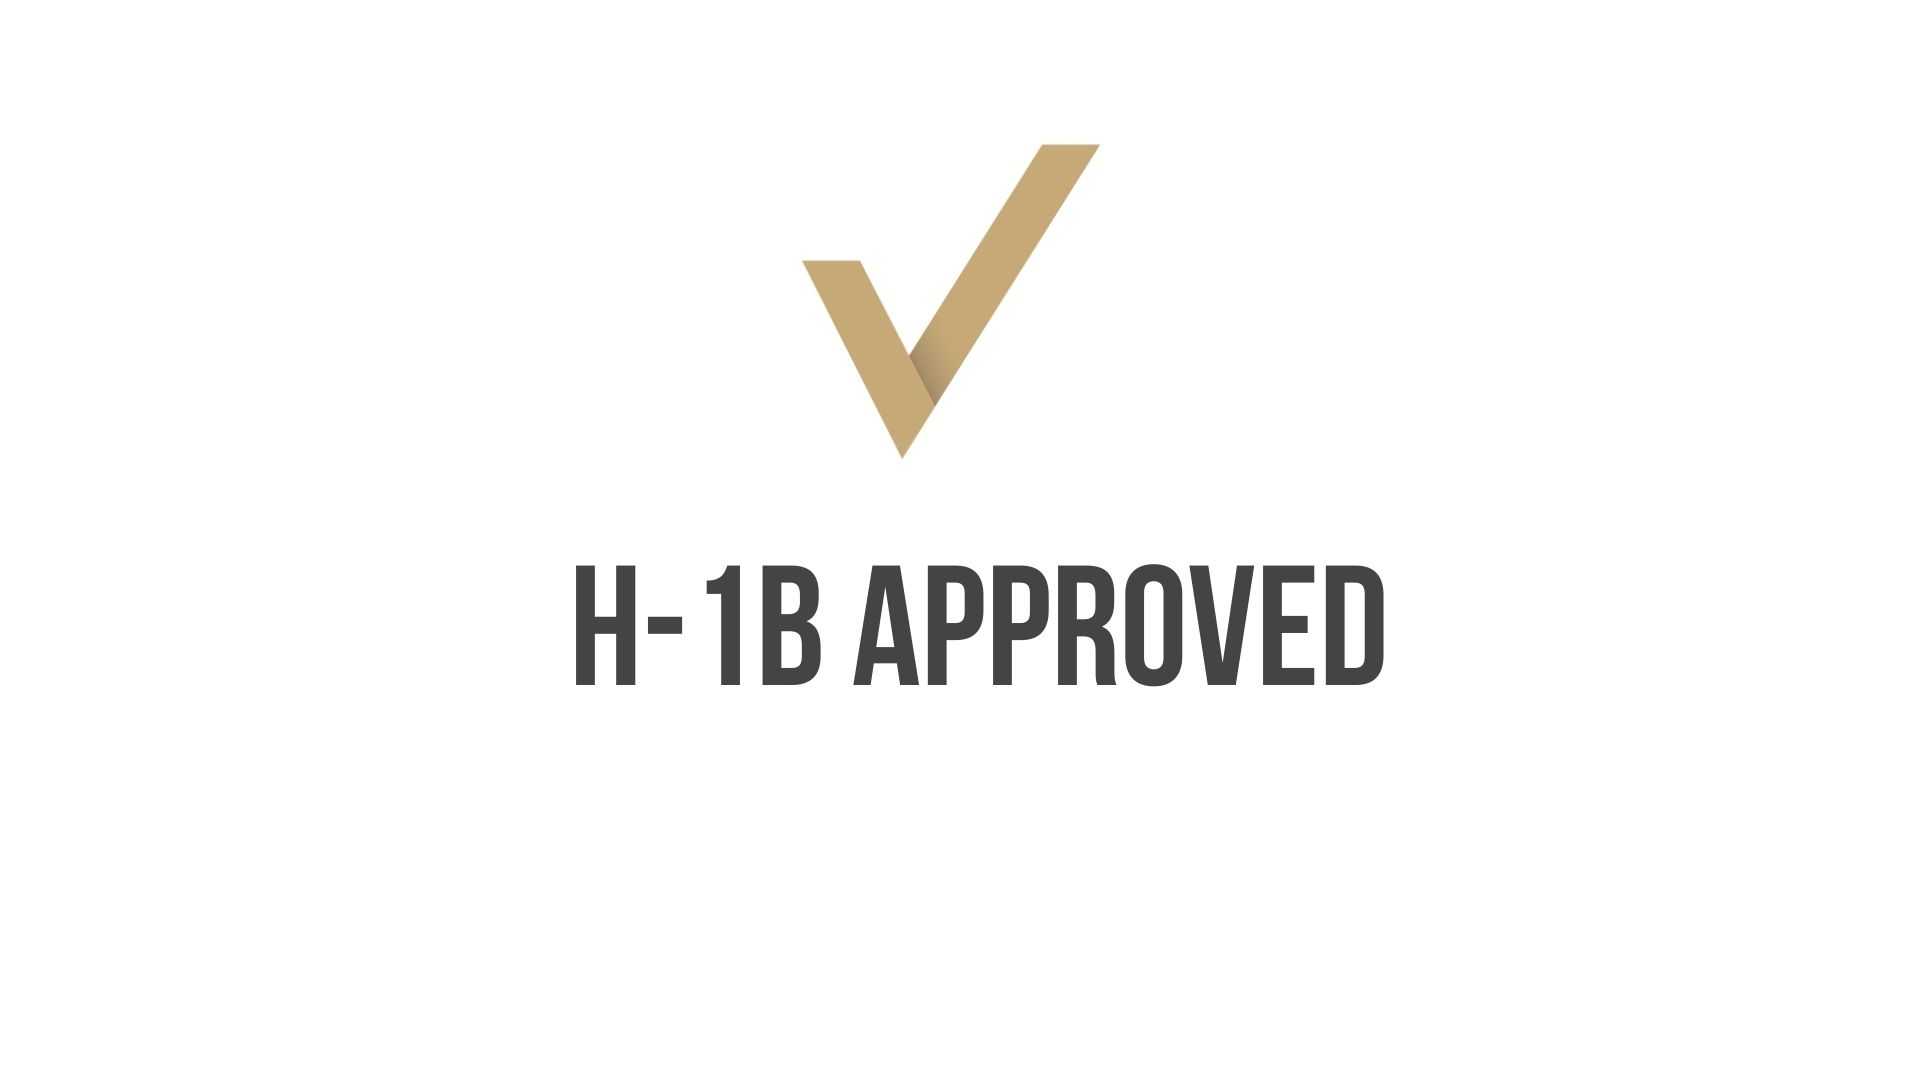 H-1B Approval for Geographic Information System Analyst